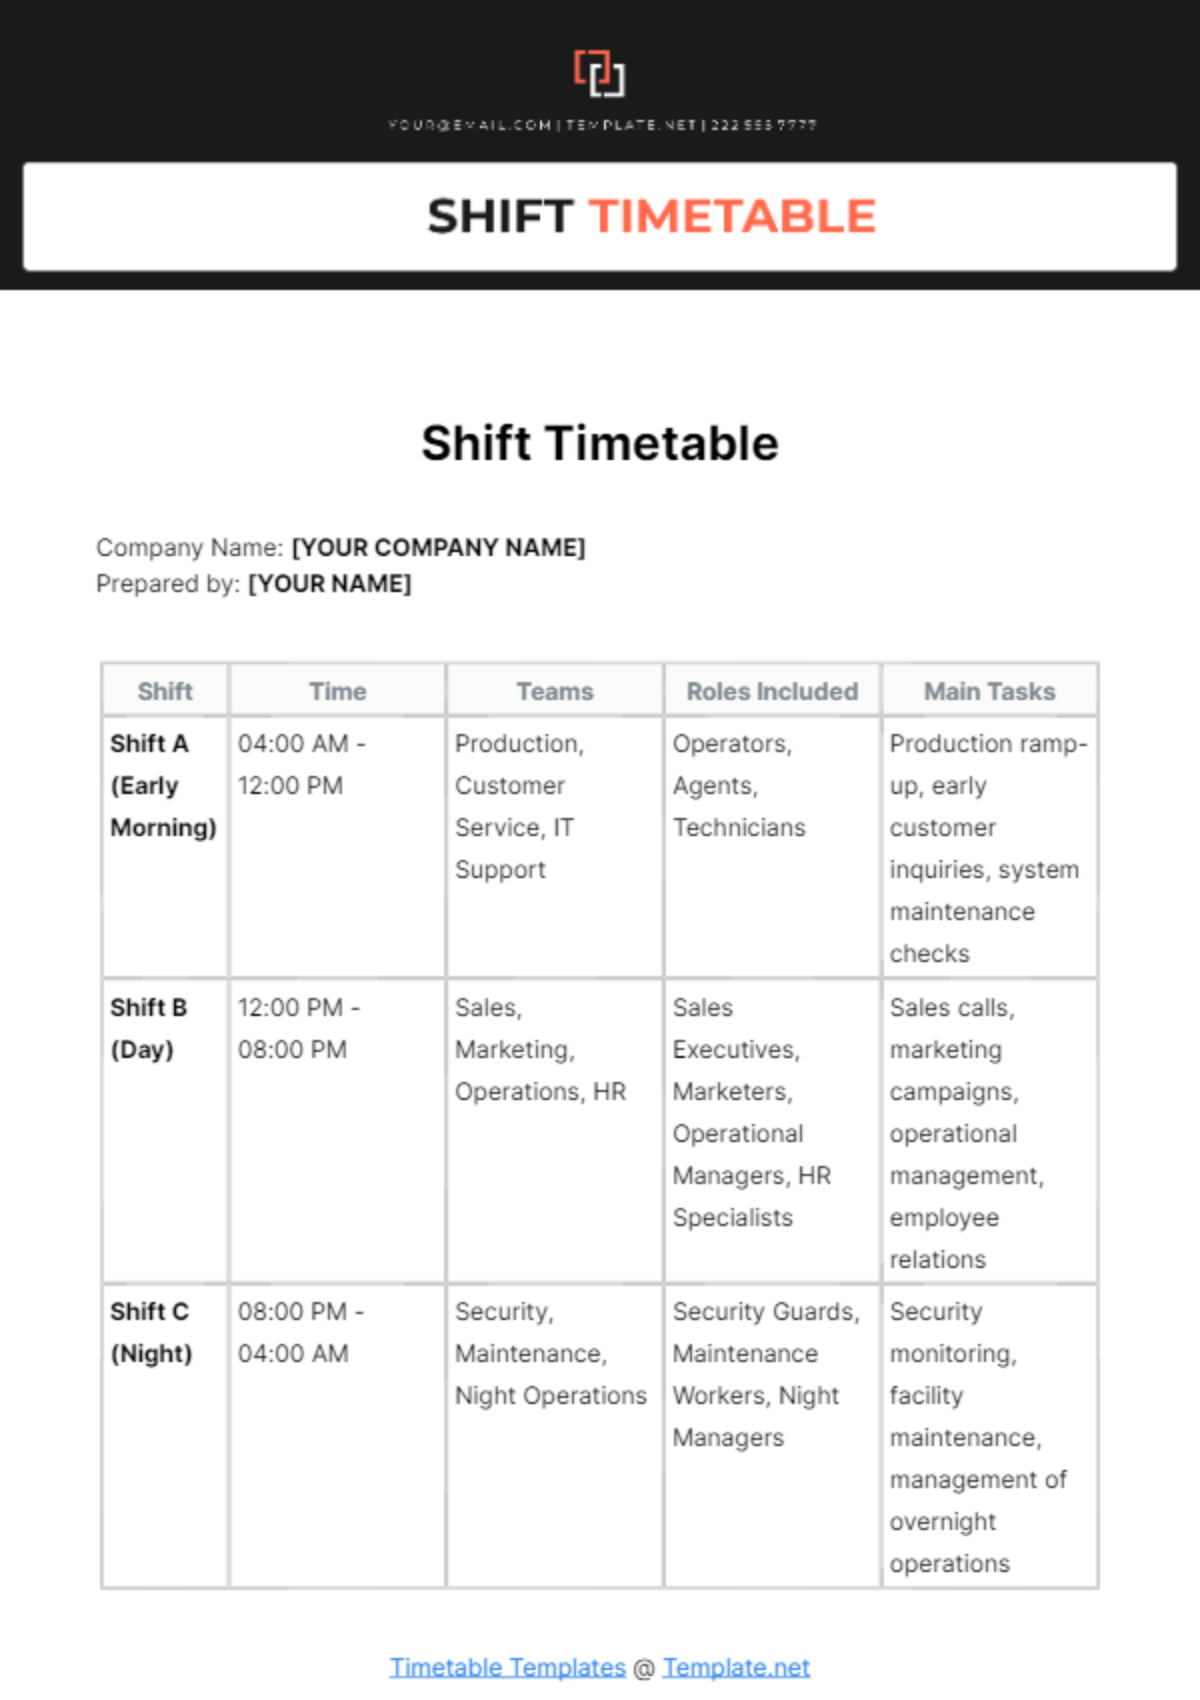 Shift Timetable Template